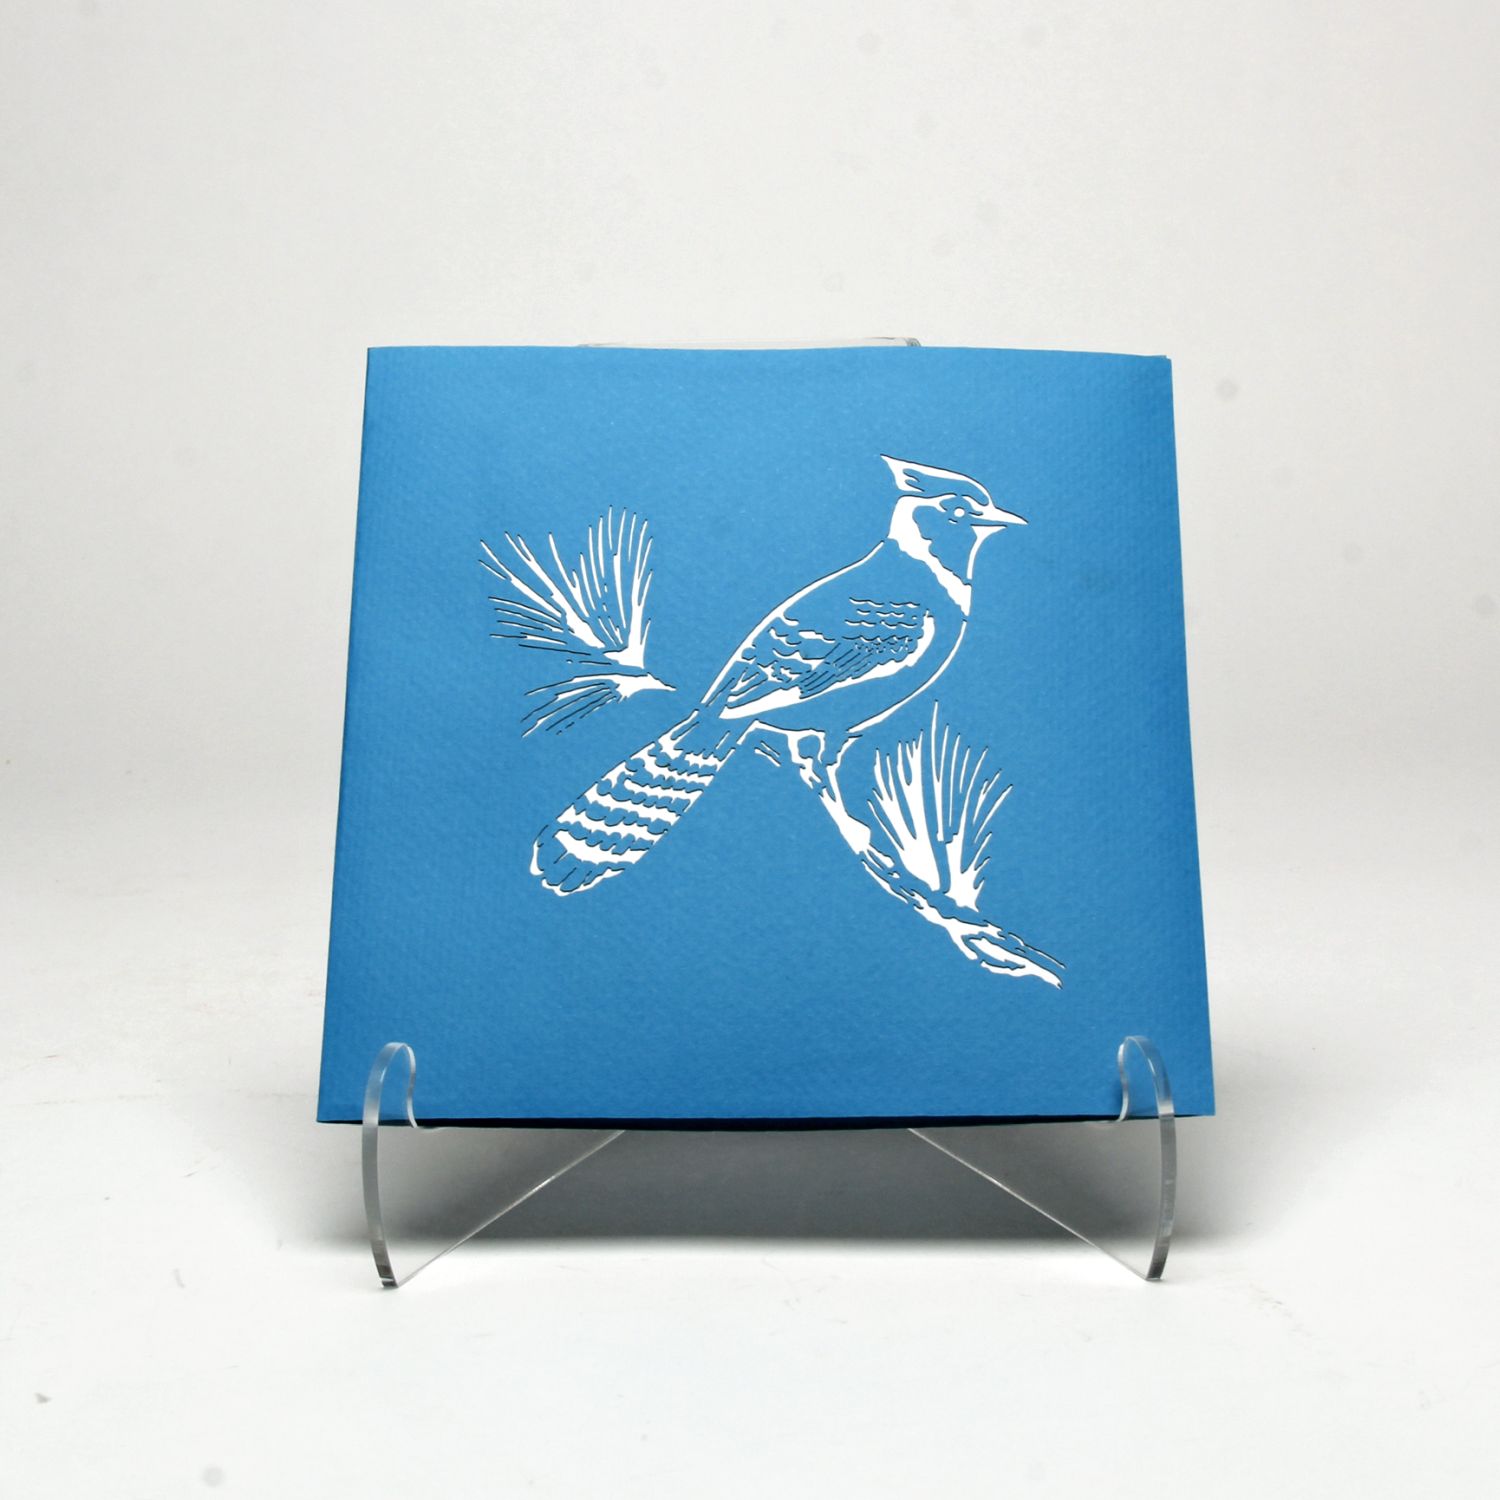 Roses without Thorns: Blue Jay Product Image 2 of 3